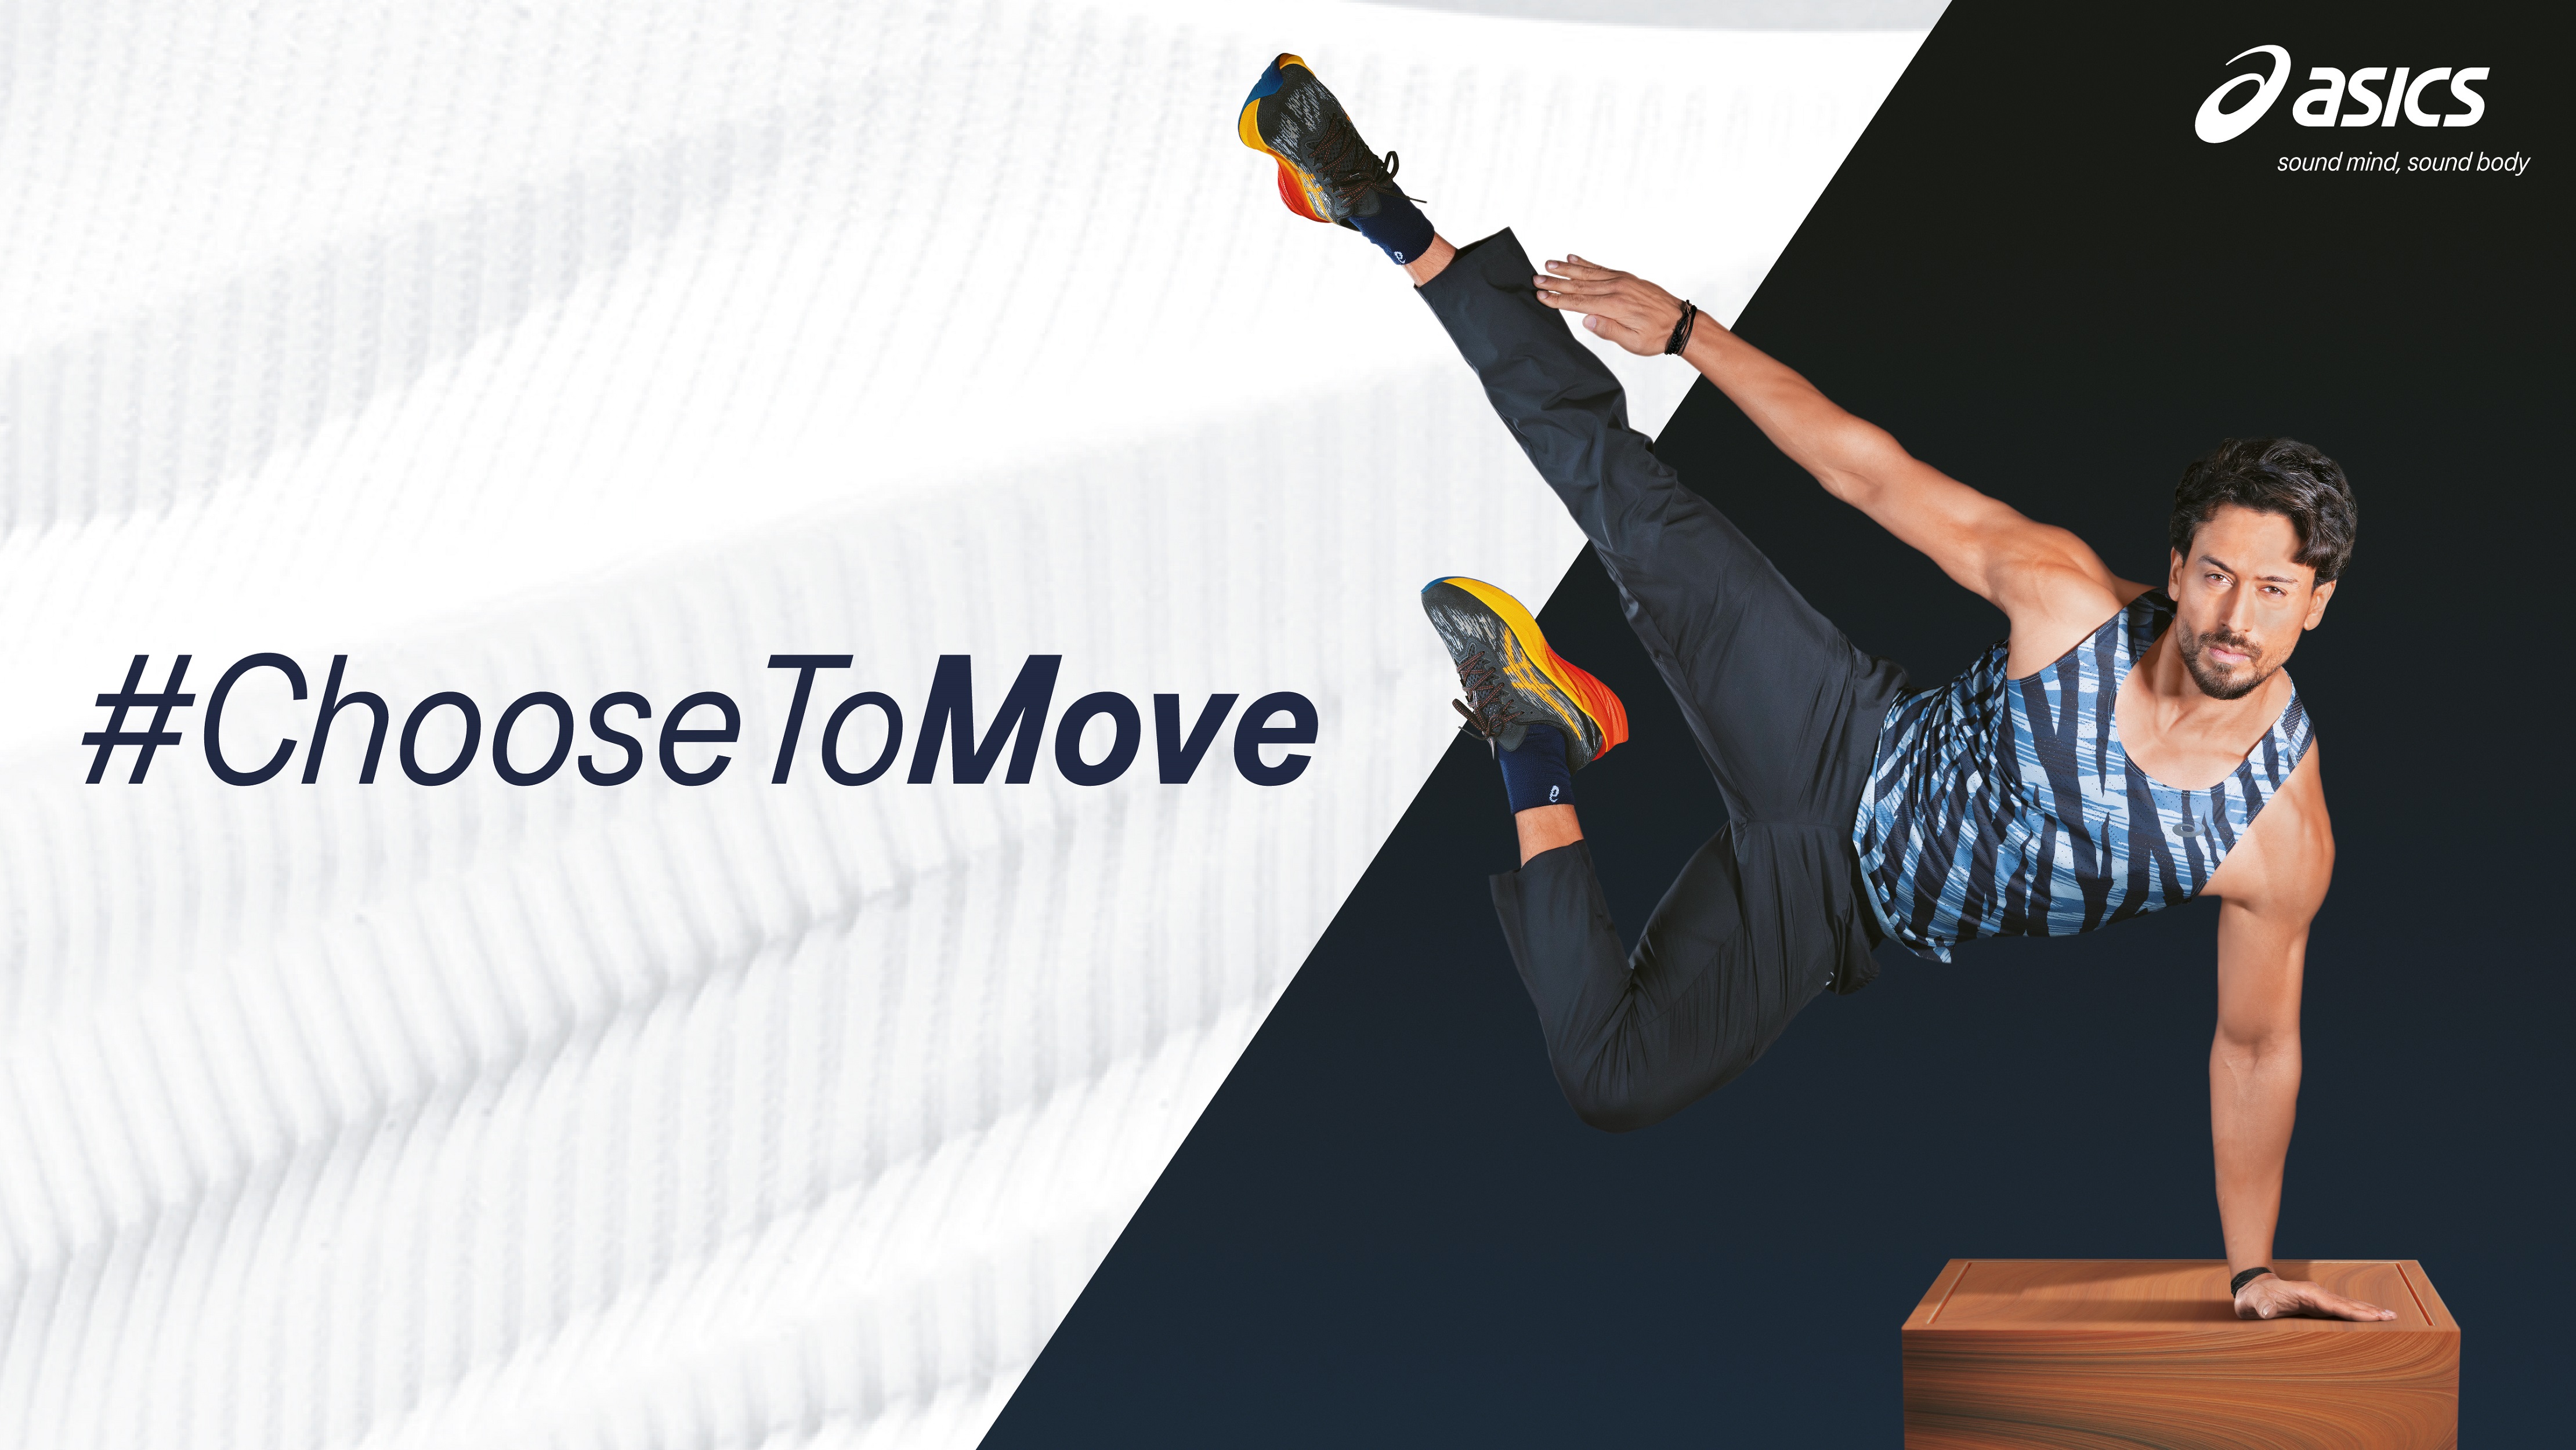 ASICS India celebrates its philosophy of Sound Mind Sound Body through the brand campaign ‘Choose To Move’